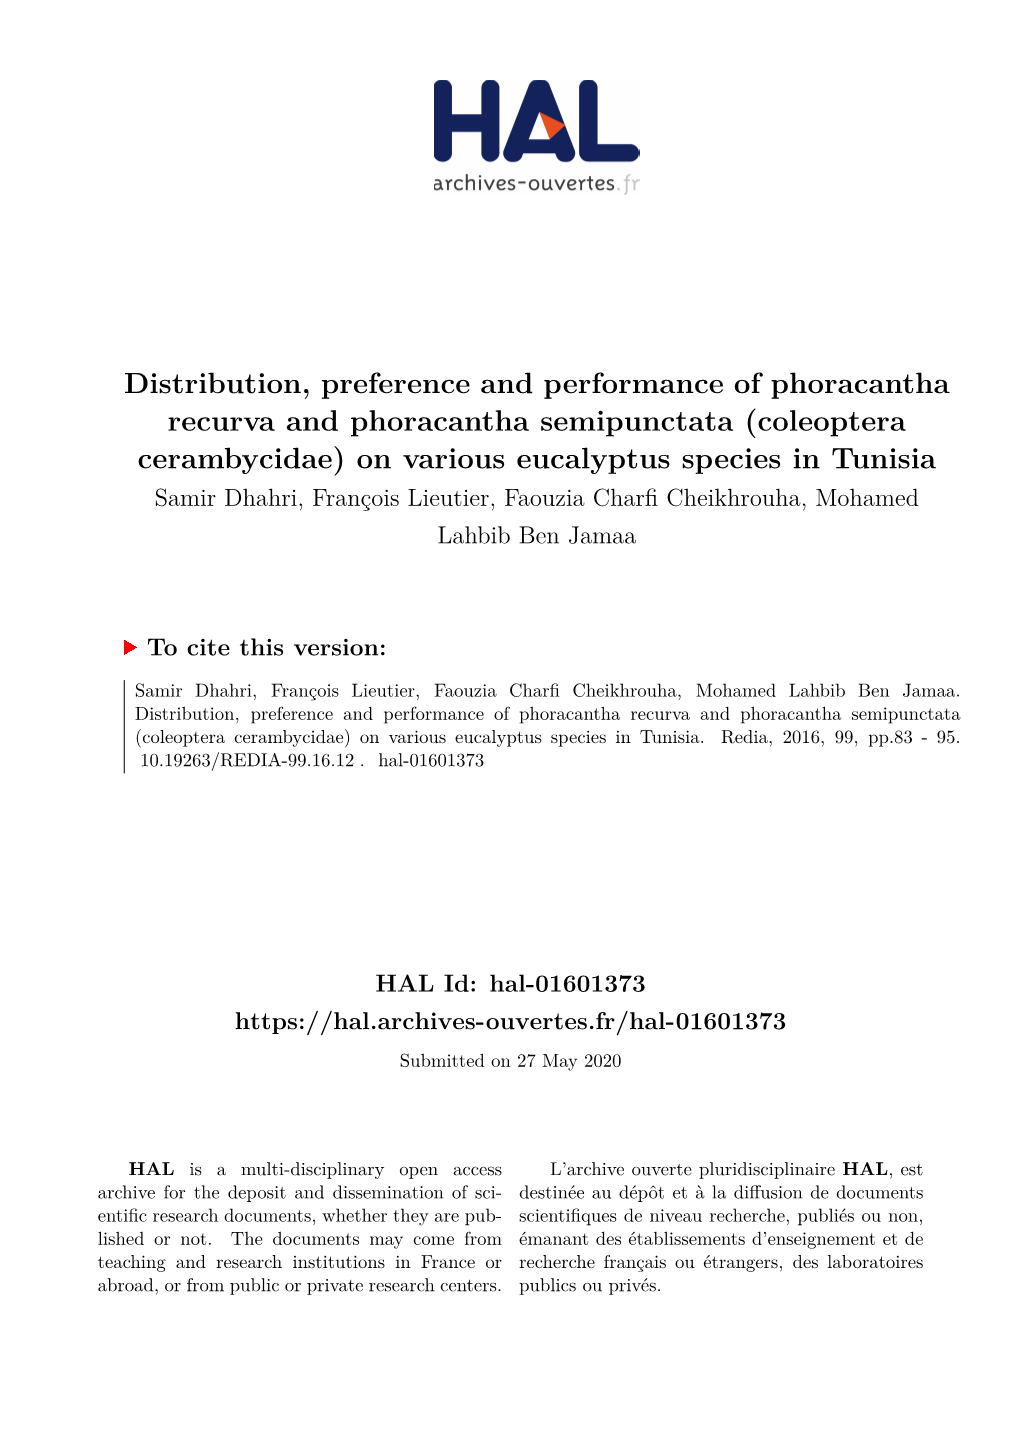 Distribution, Preference and Performance of Phoracantha